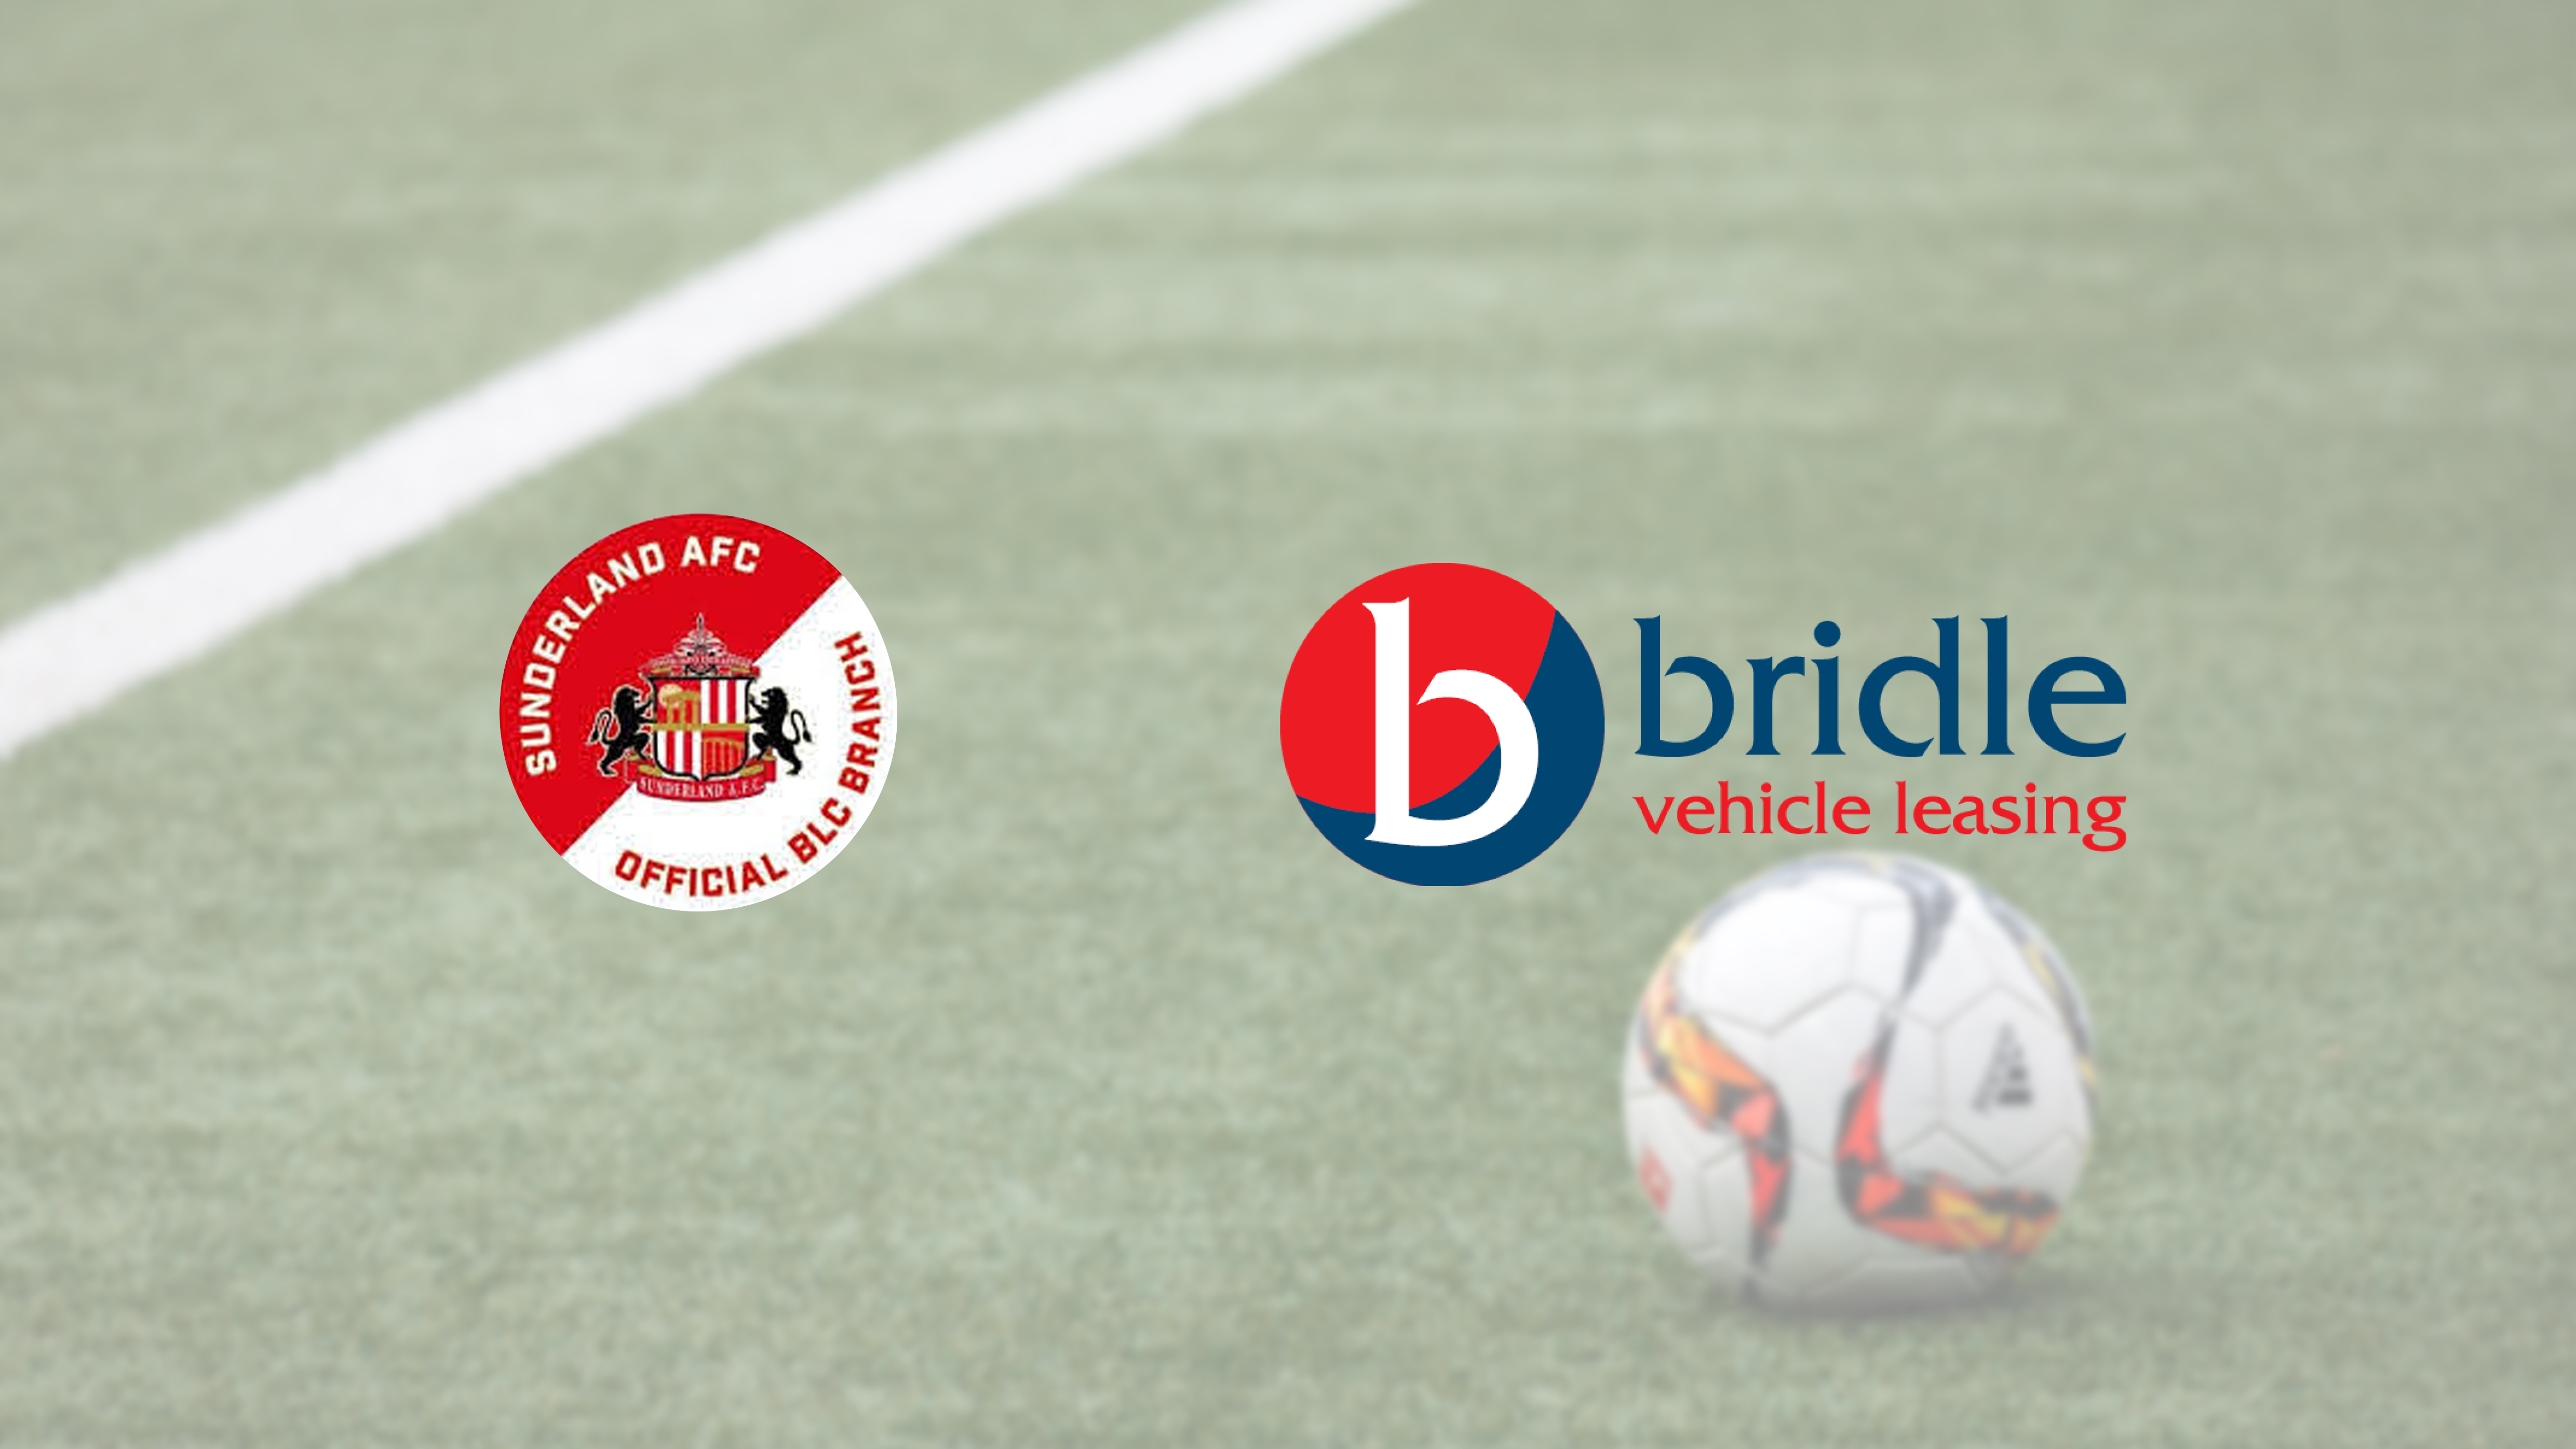 Sunderland AFC Branch Liaison Council secure sponsorship to deliver their mental health support initiative.